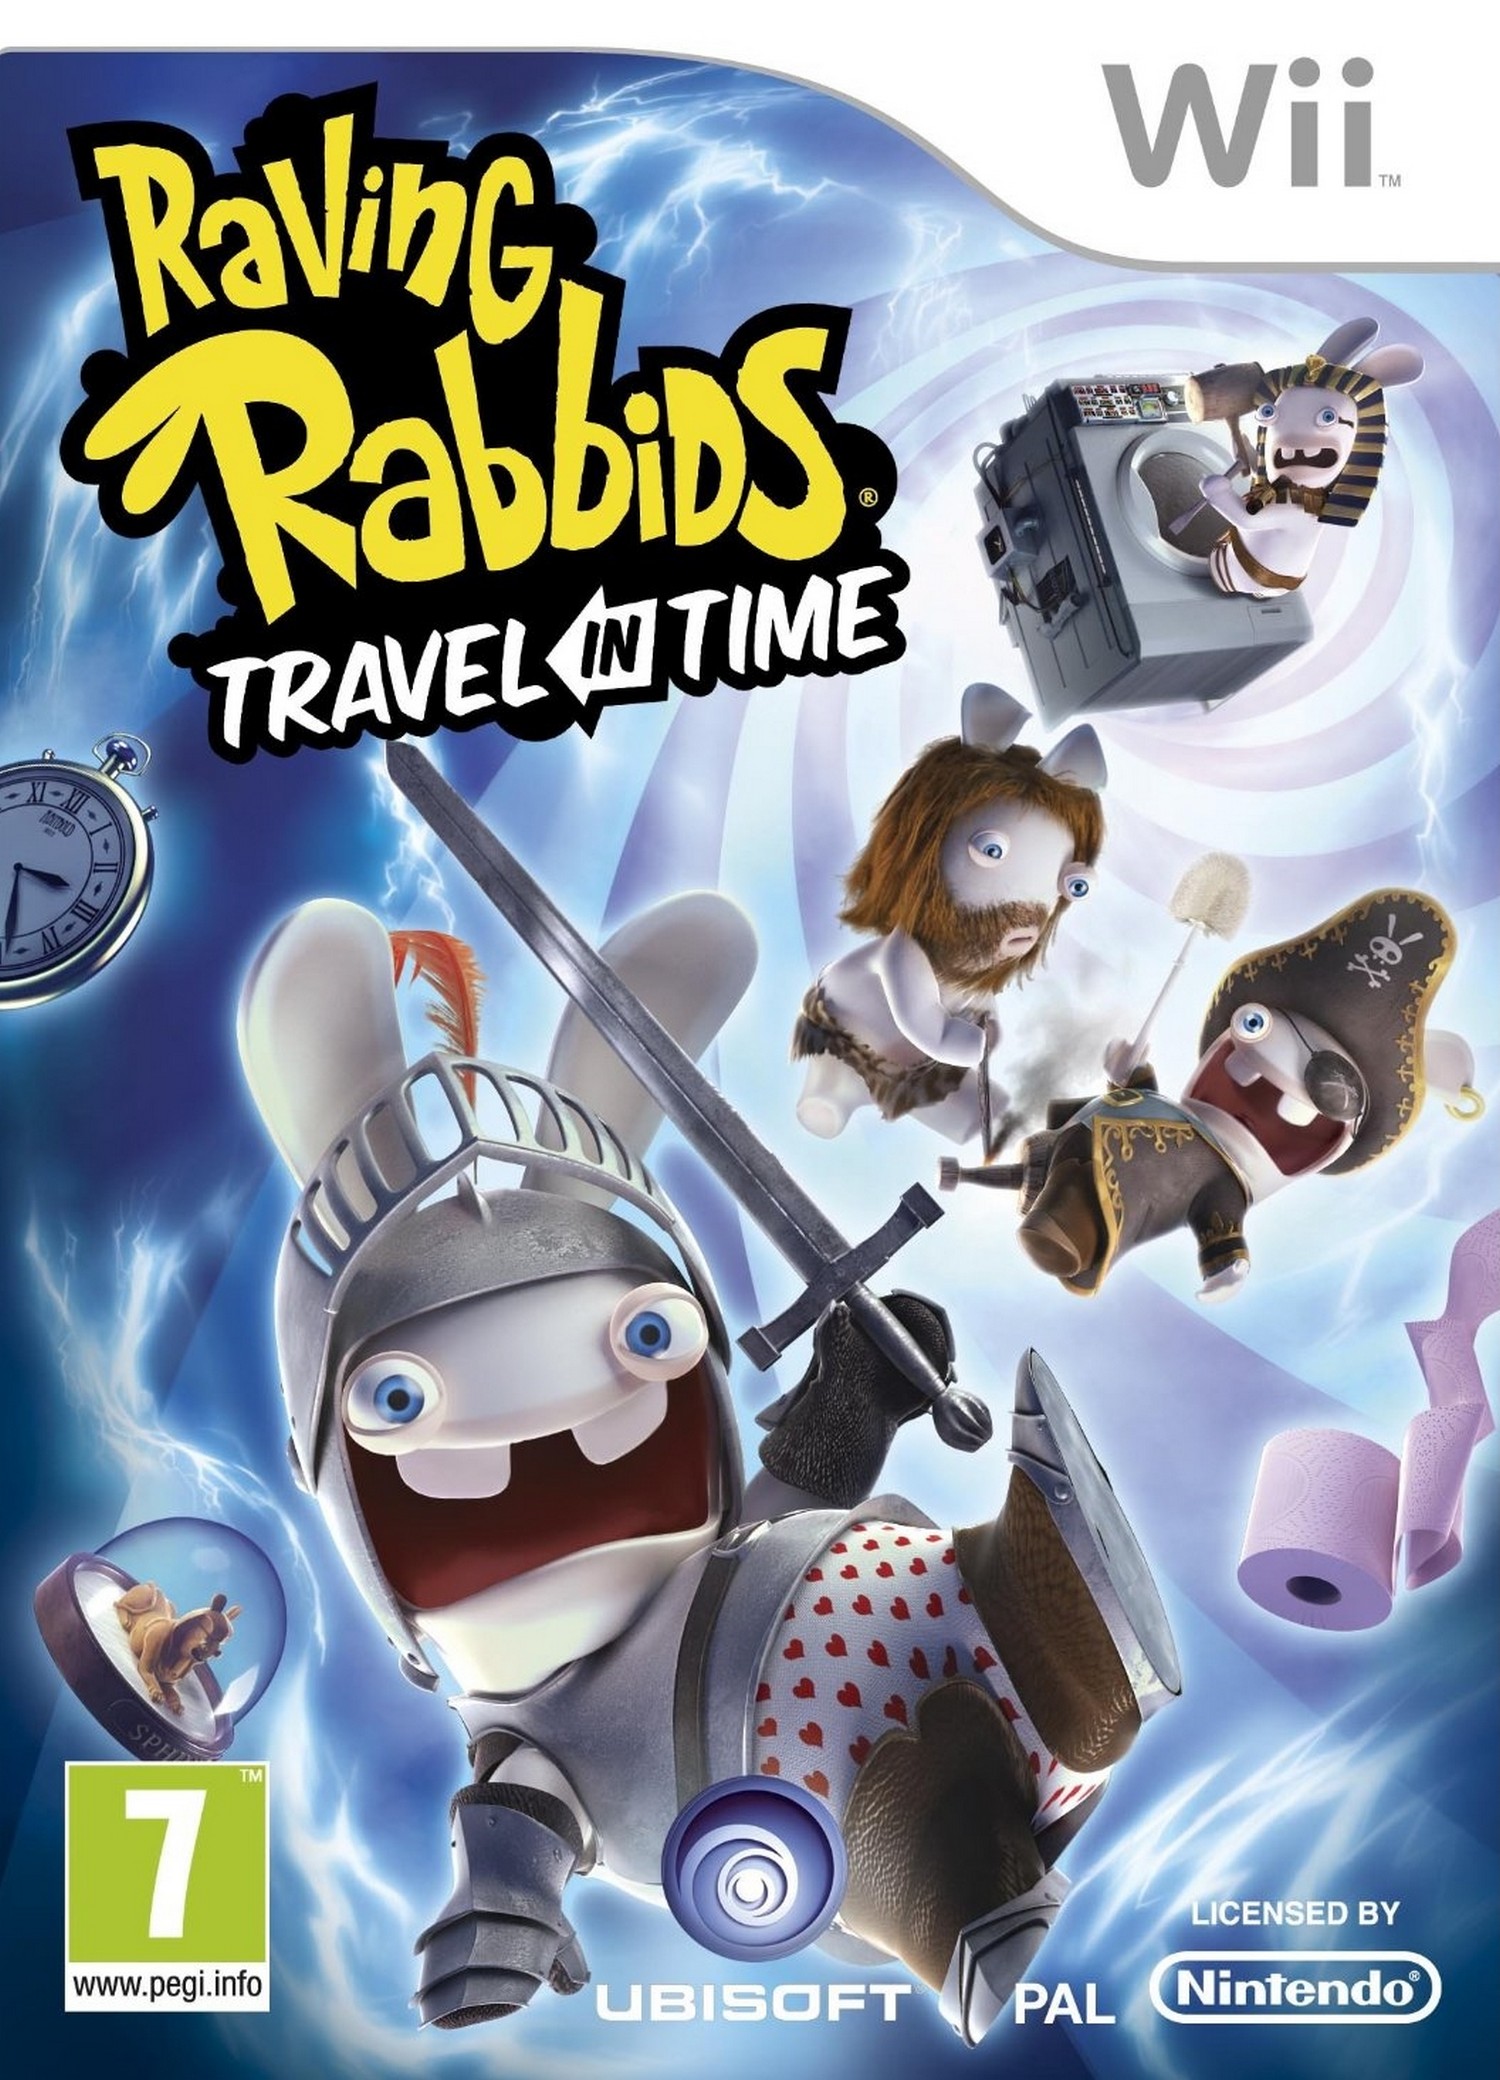 Wii Raving Rabbids: Travel in Time